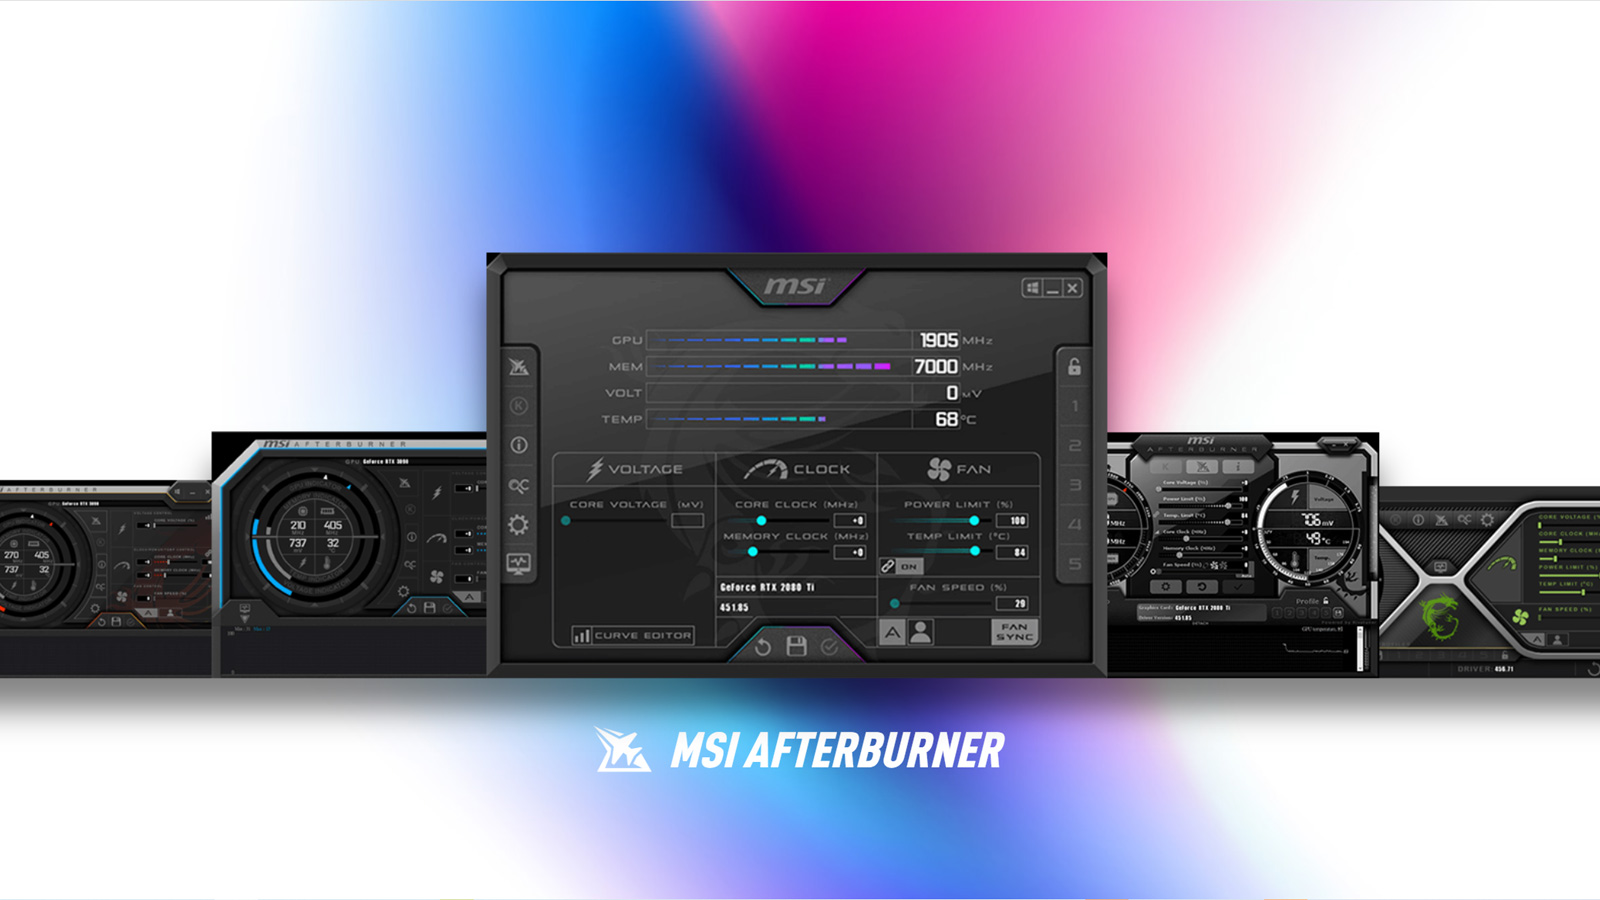 Fake MSI Afterburner targets Windows gamers with miners, info-stealers